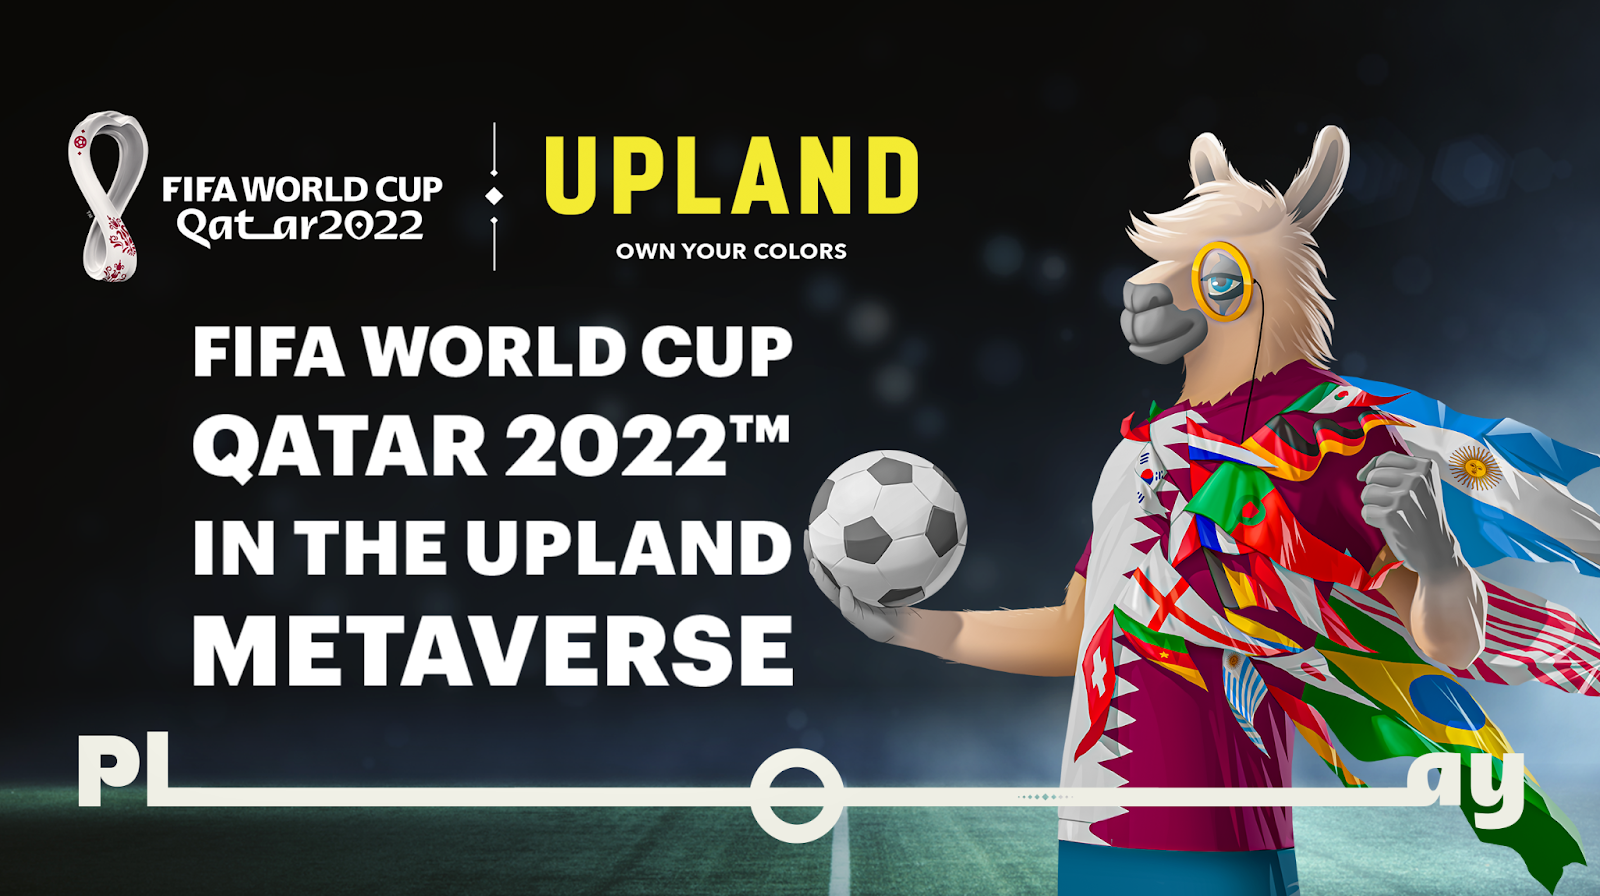 Upland and FIFA Officially Launch the FIFA World Cup Qatar 2022™ Experience in The Upland Metaverse – Sponsored Bitcoin News